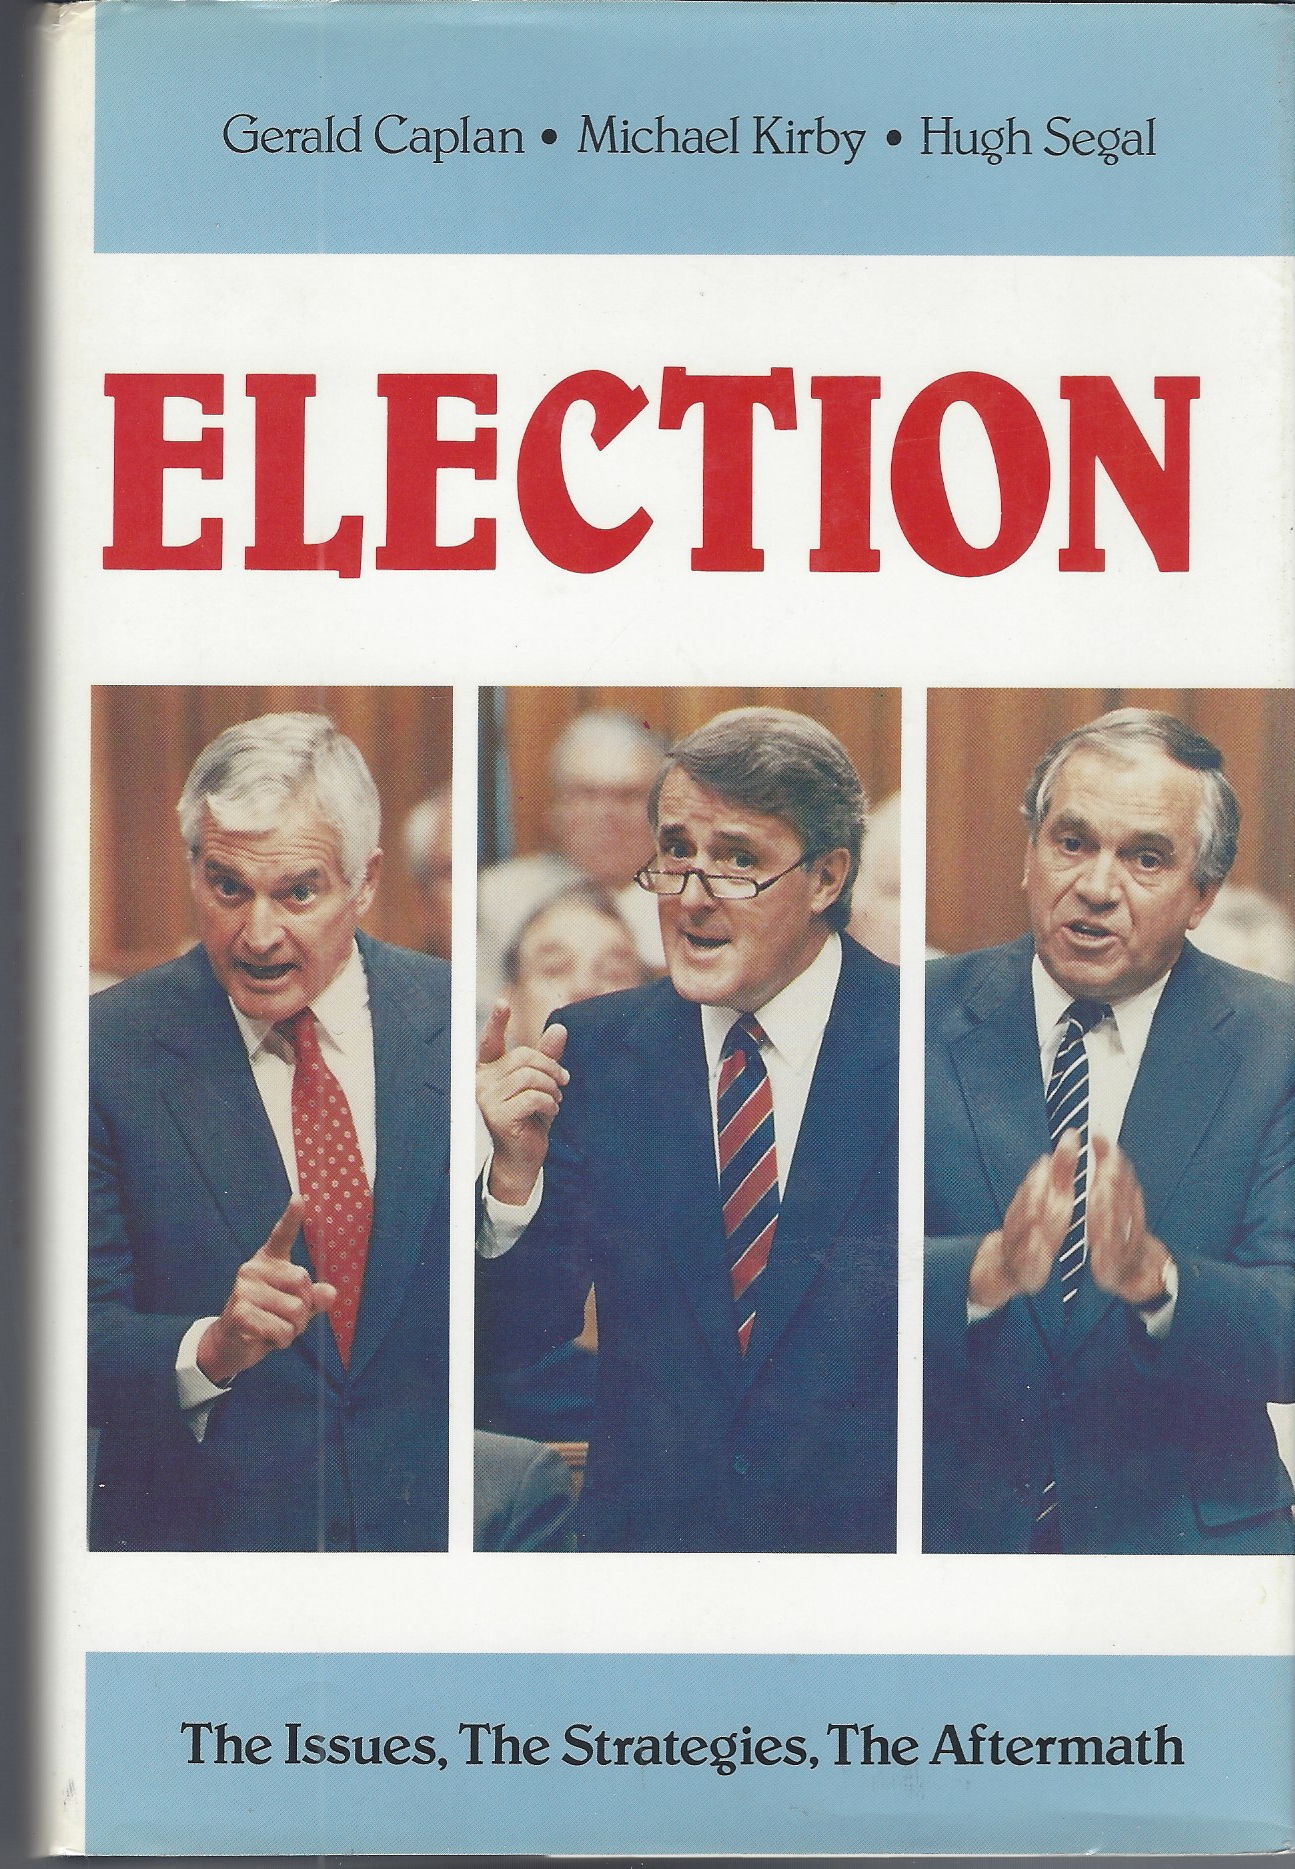 CAPLAN GERALD, KIRBY MICHAEL, SEGAL HUGH - Election: The Issues, the Strategies, the Aftermath